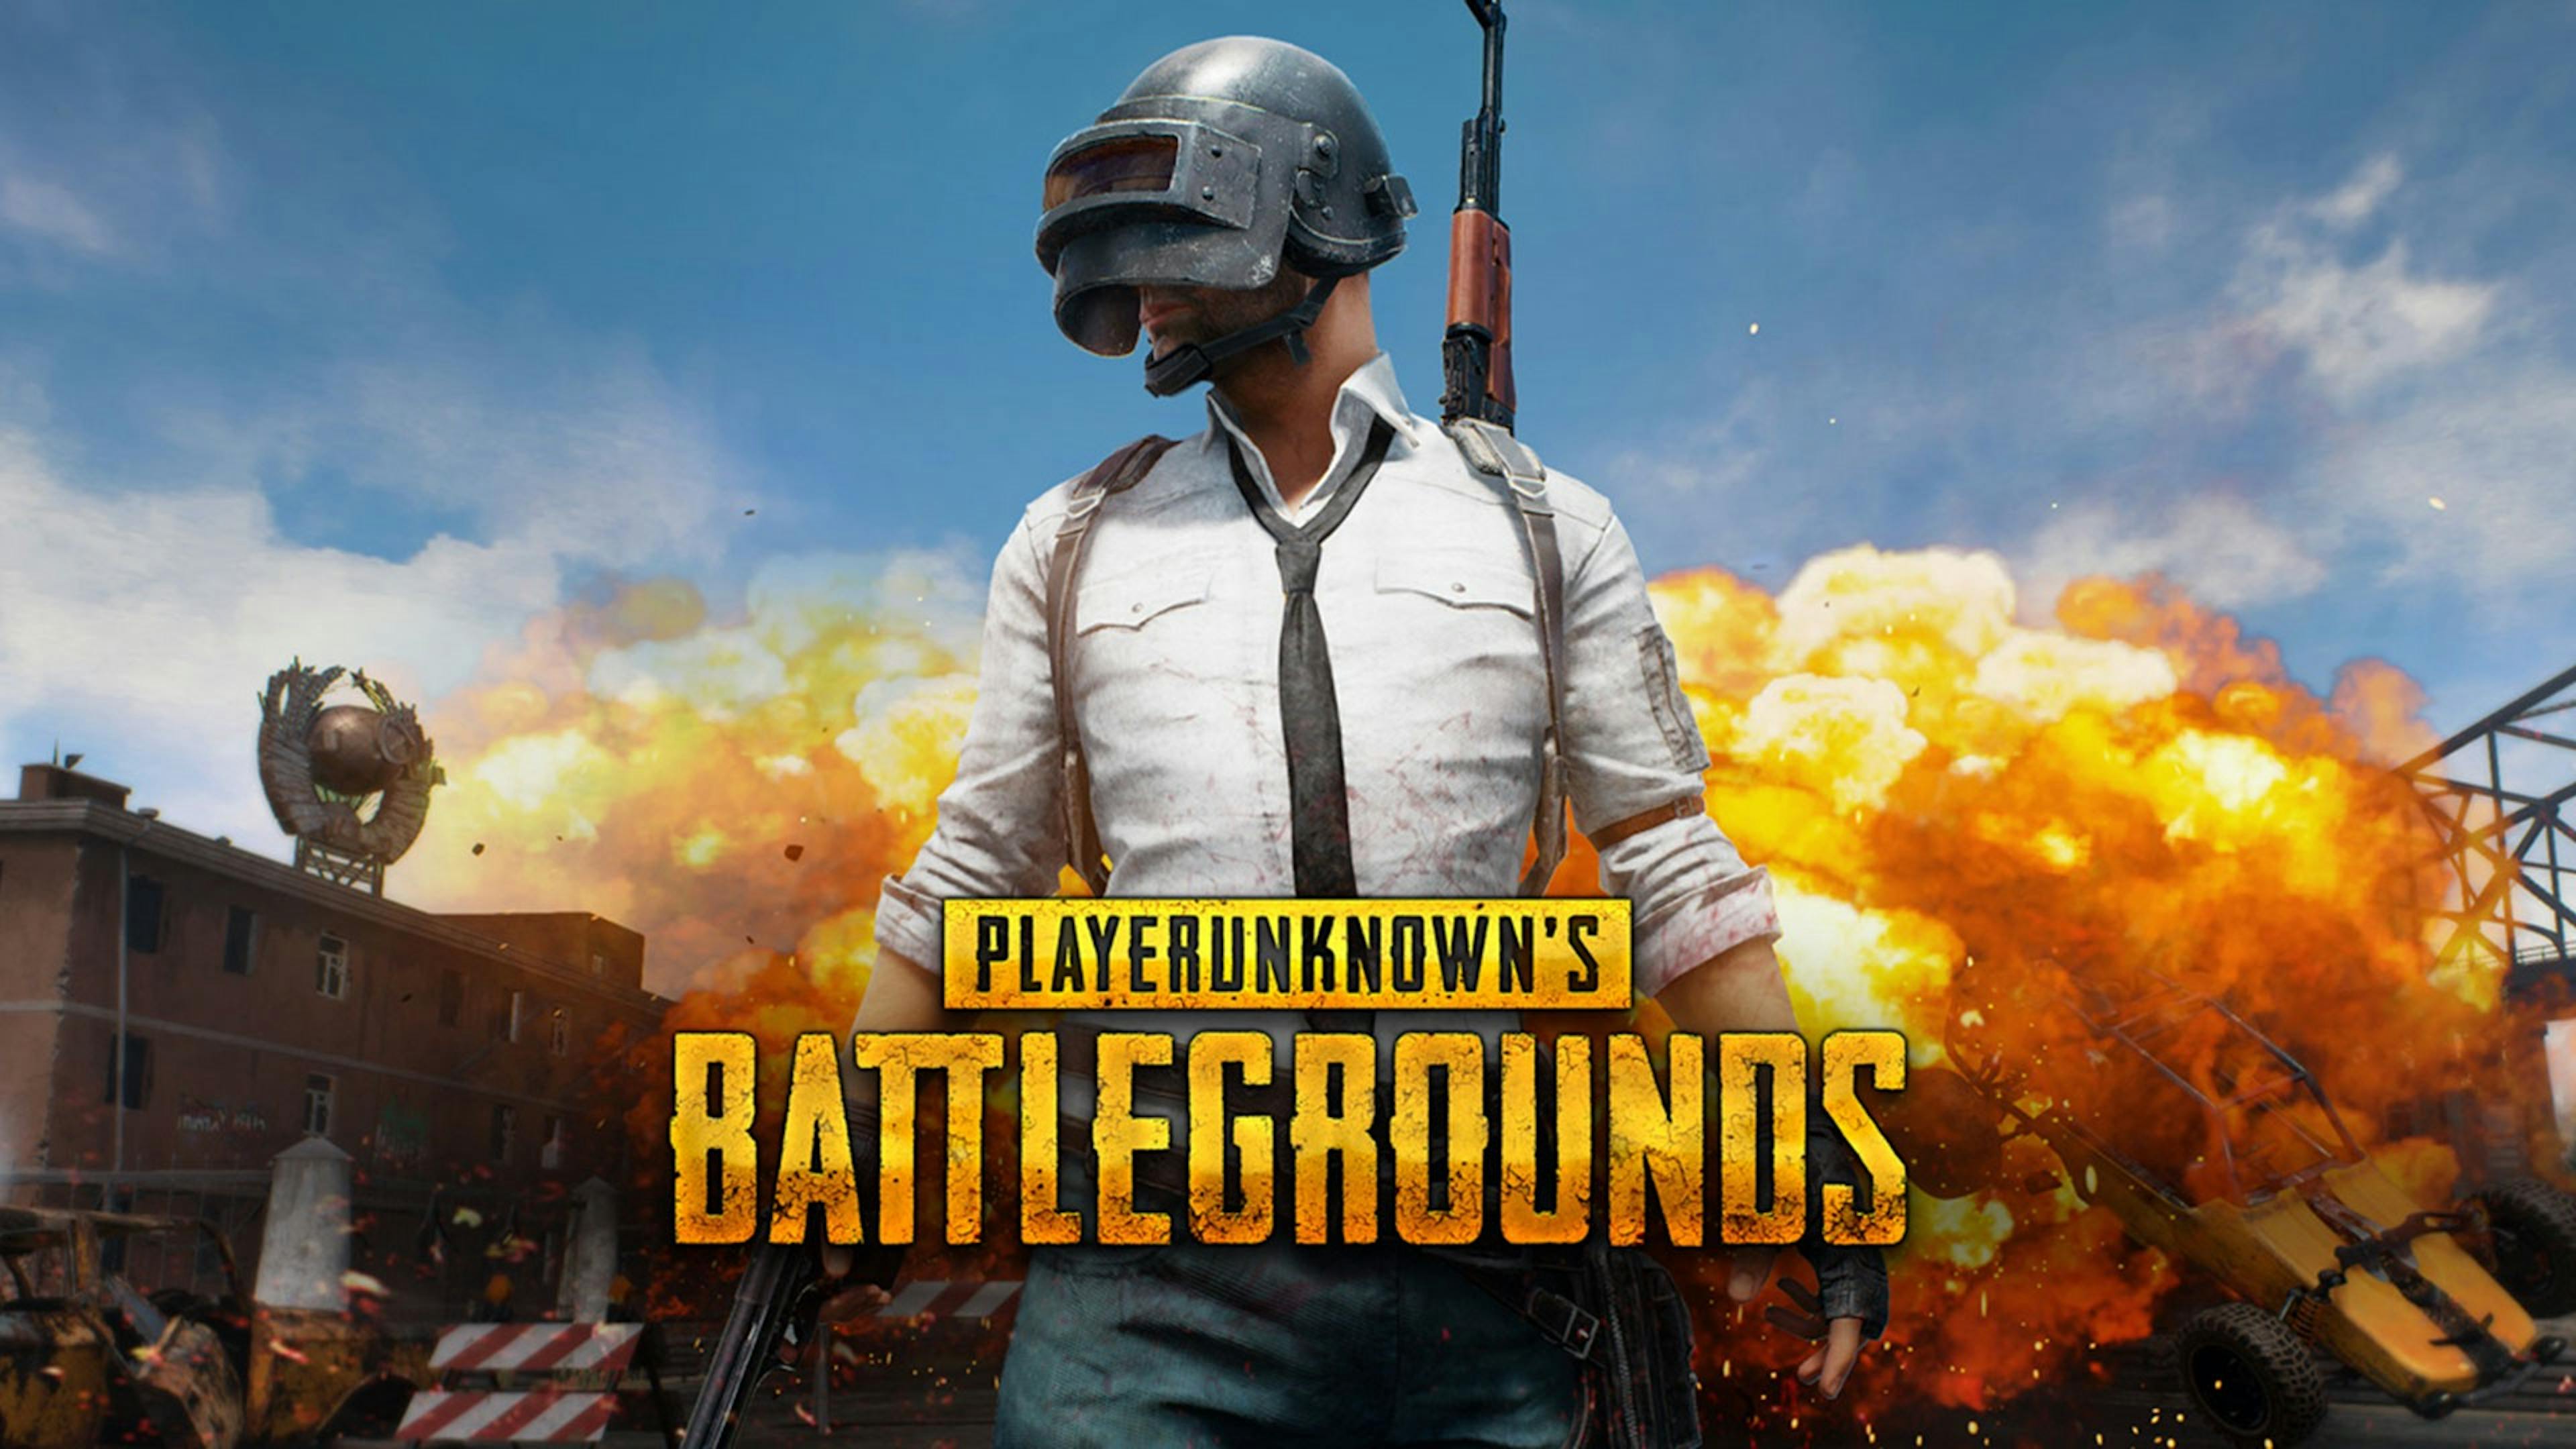 /how-to-play-pubg-on-aws-db2e75fa599b feature image